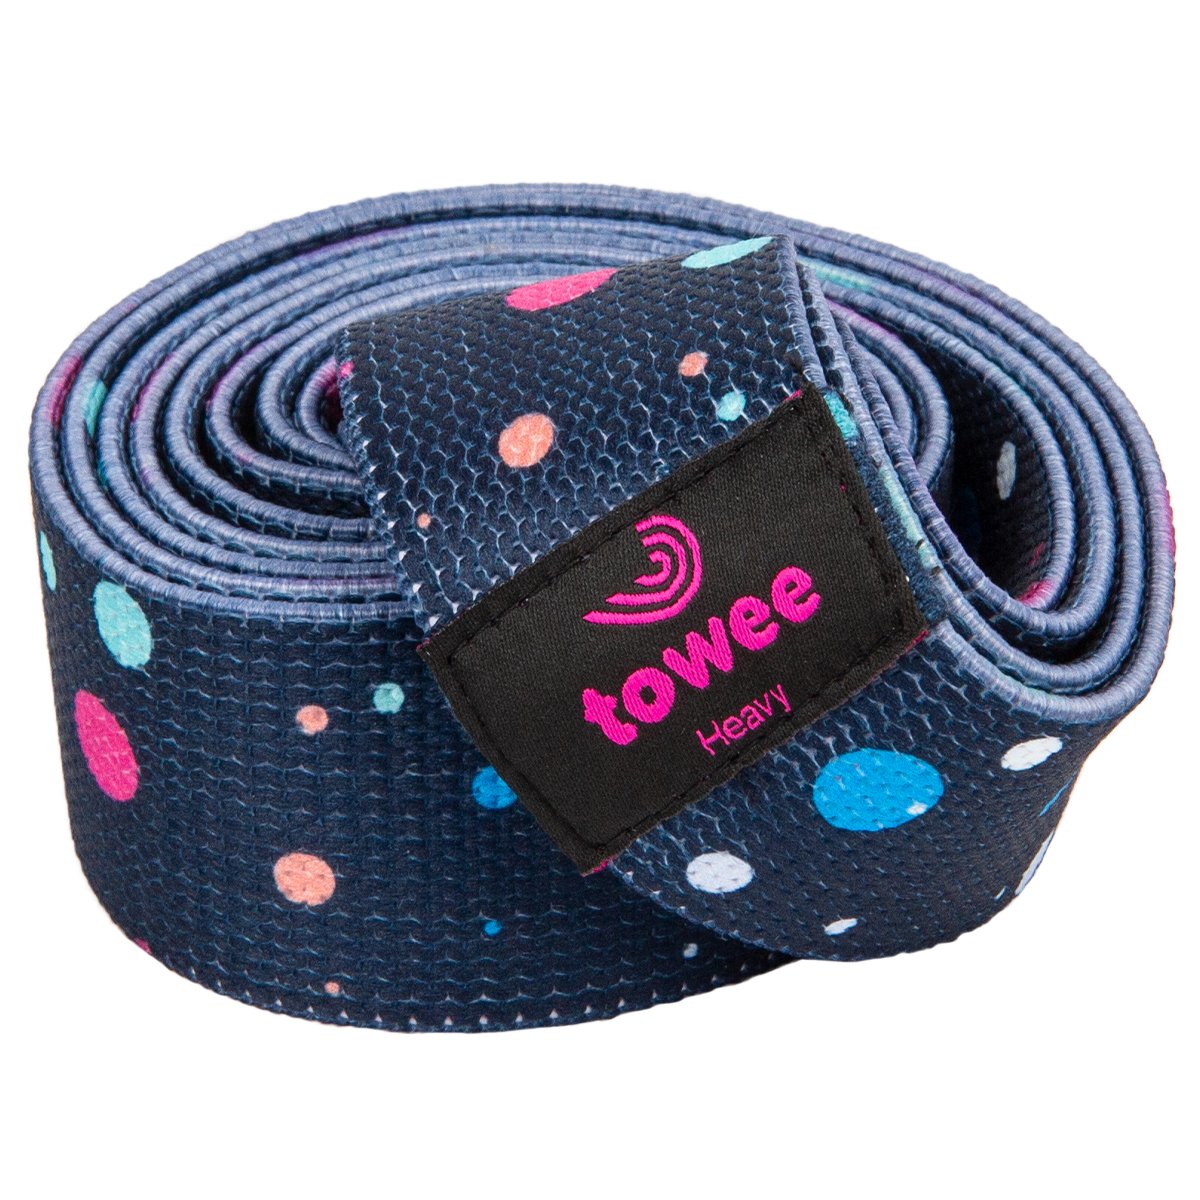 Tweee Textile Resistance Rubber Extra Long Cosmic - Strong Resistance